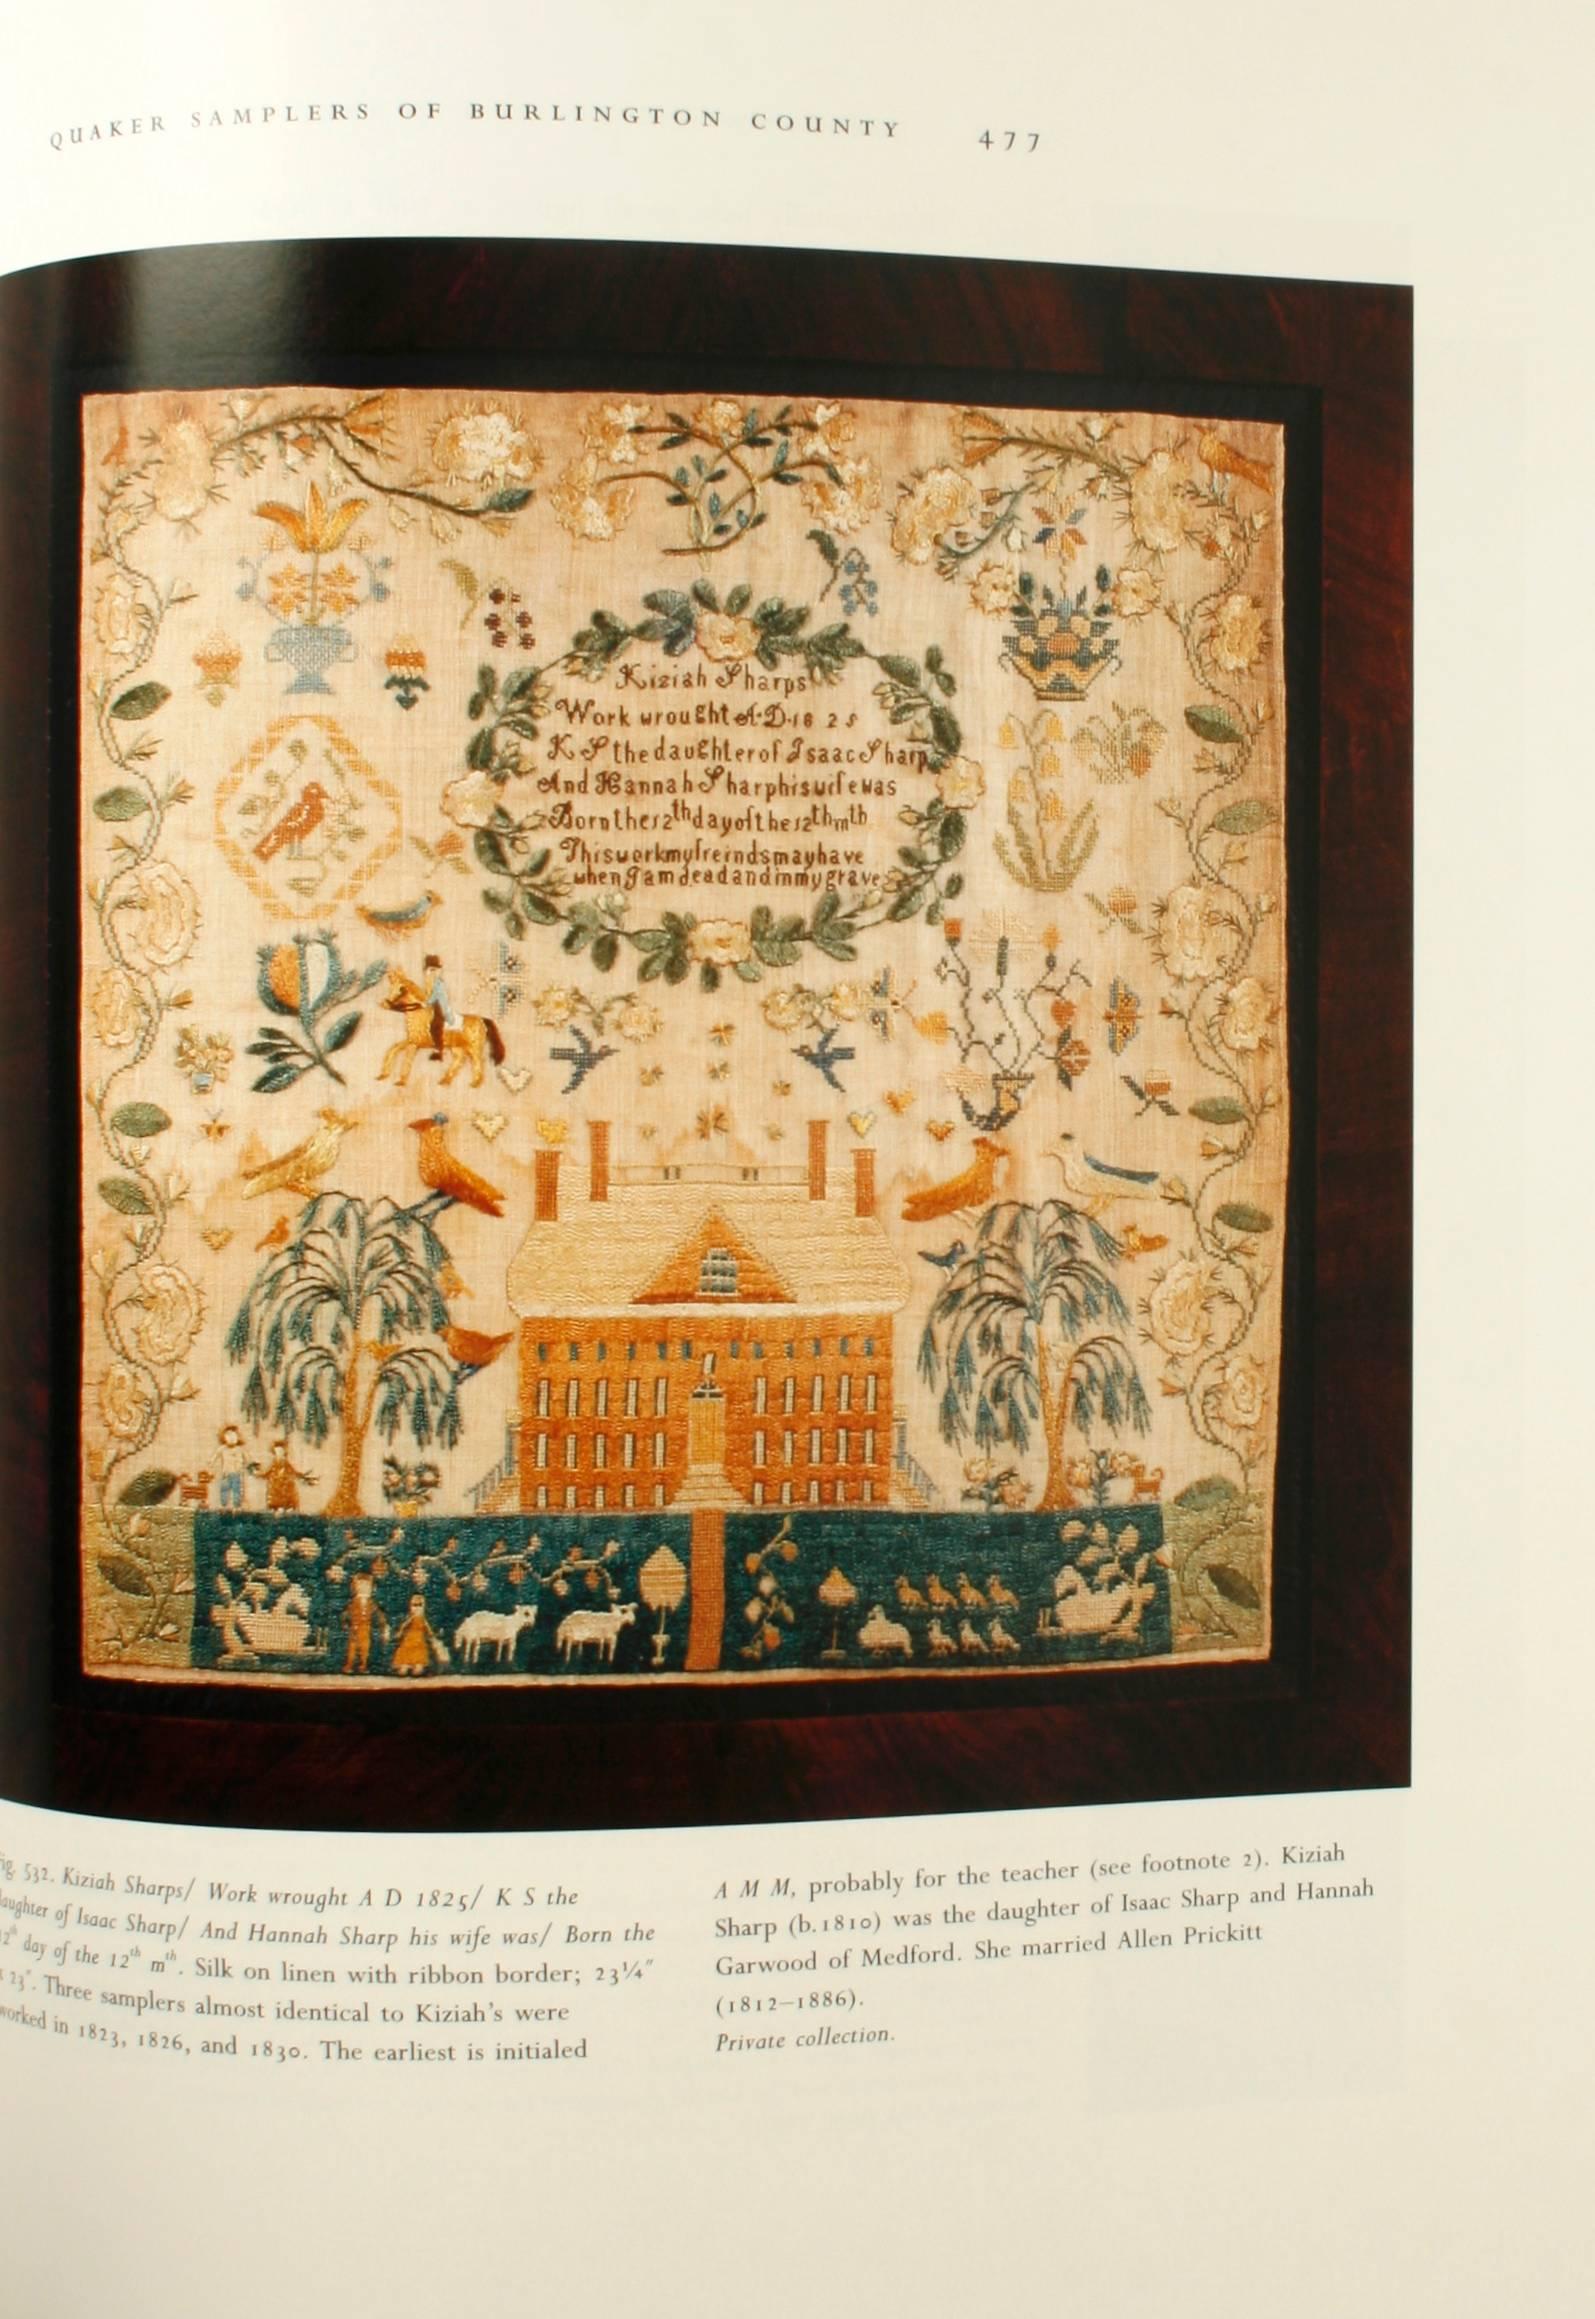 20th Century Girlhood Embroidery, American Samplers and Pictorial Needlework, 1650-1850